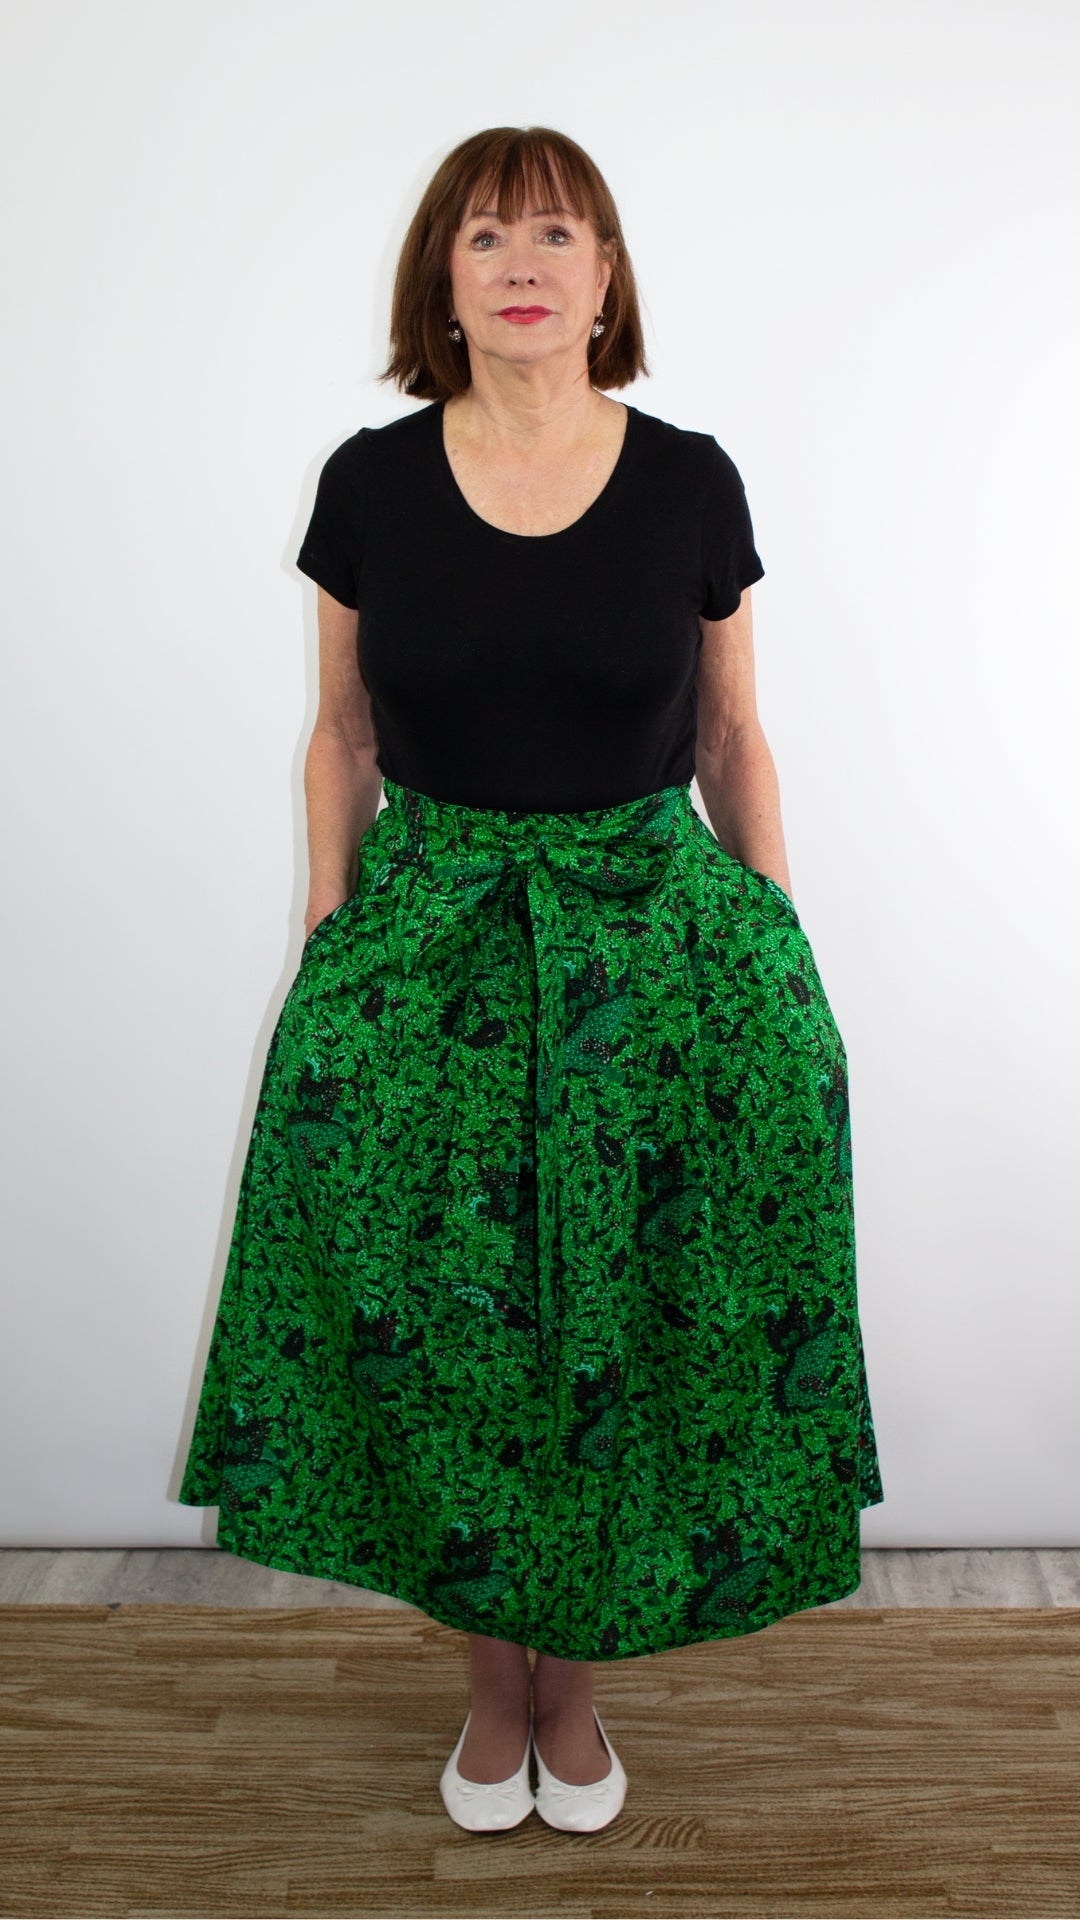 A model adorned in a botanical green print skirt creates a vibrant and eye-catching look. The green hue paired with a black top and white ballet flats adds a refreshing touch to the ensemble, showcasing a blend of fashion and individual flair.